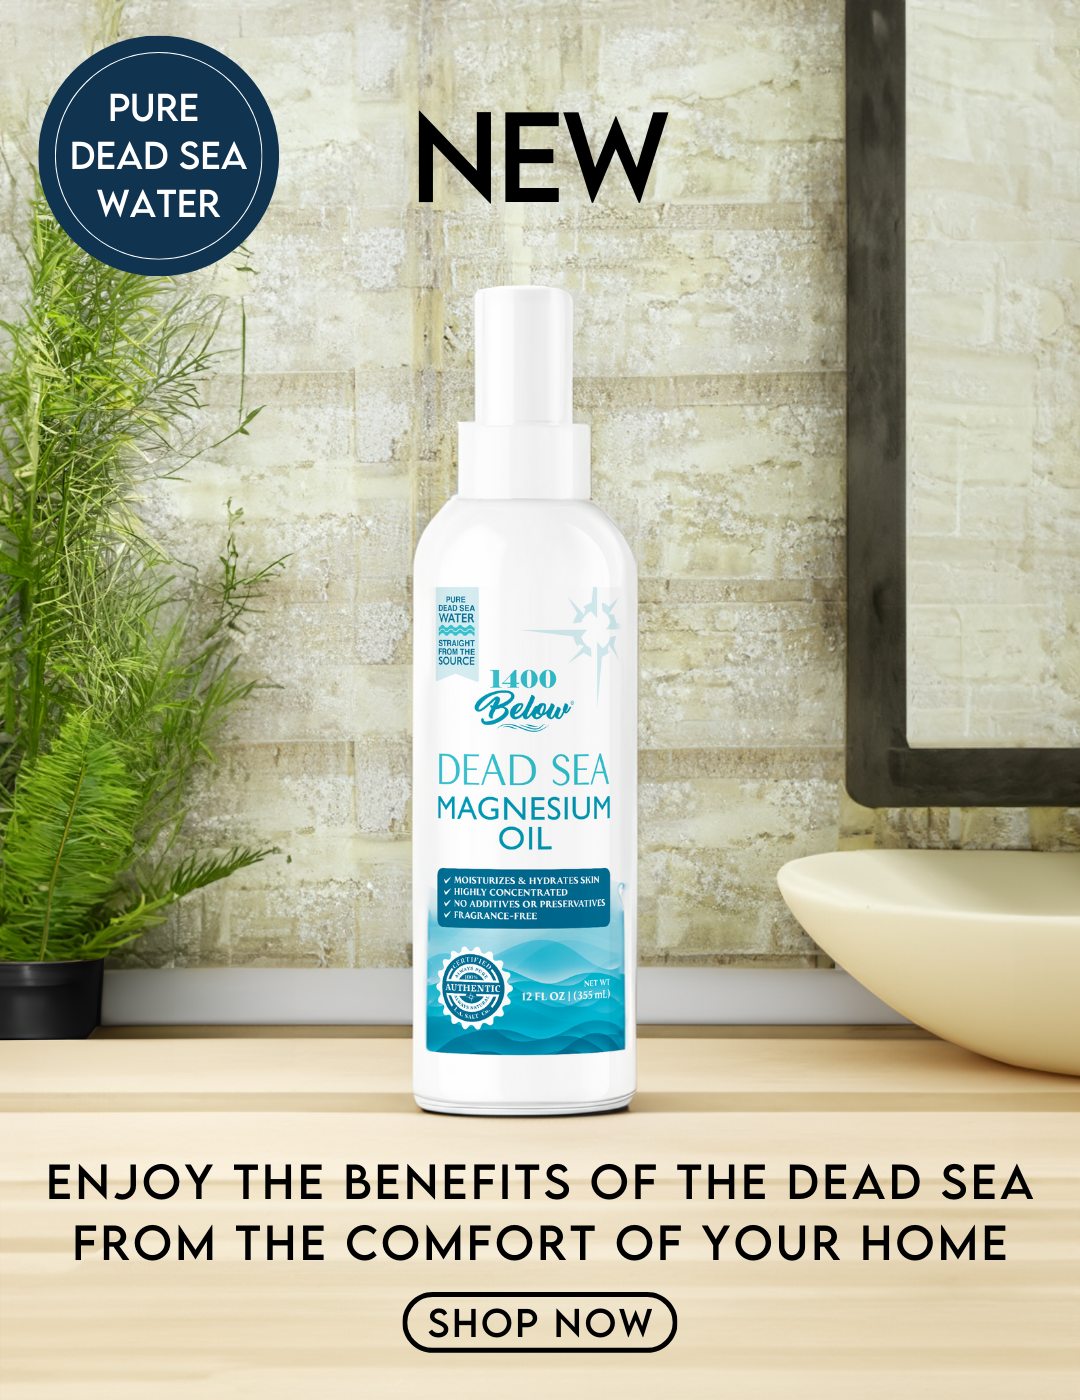 1400 BELOW DEAD SEA MAGNESIUM OIL RELAXES AND SOOTHES MUSCLES